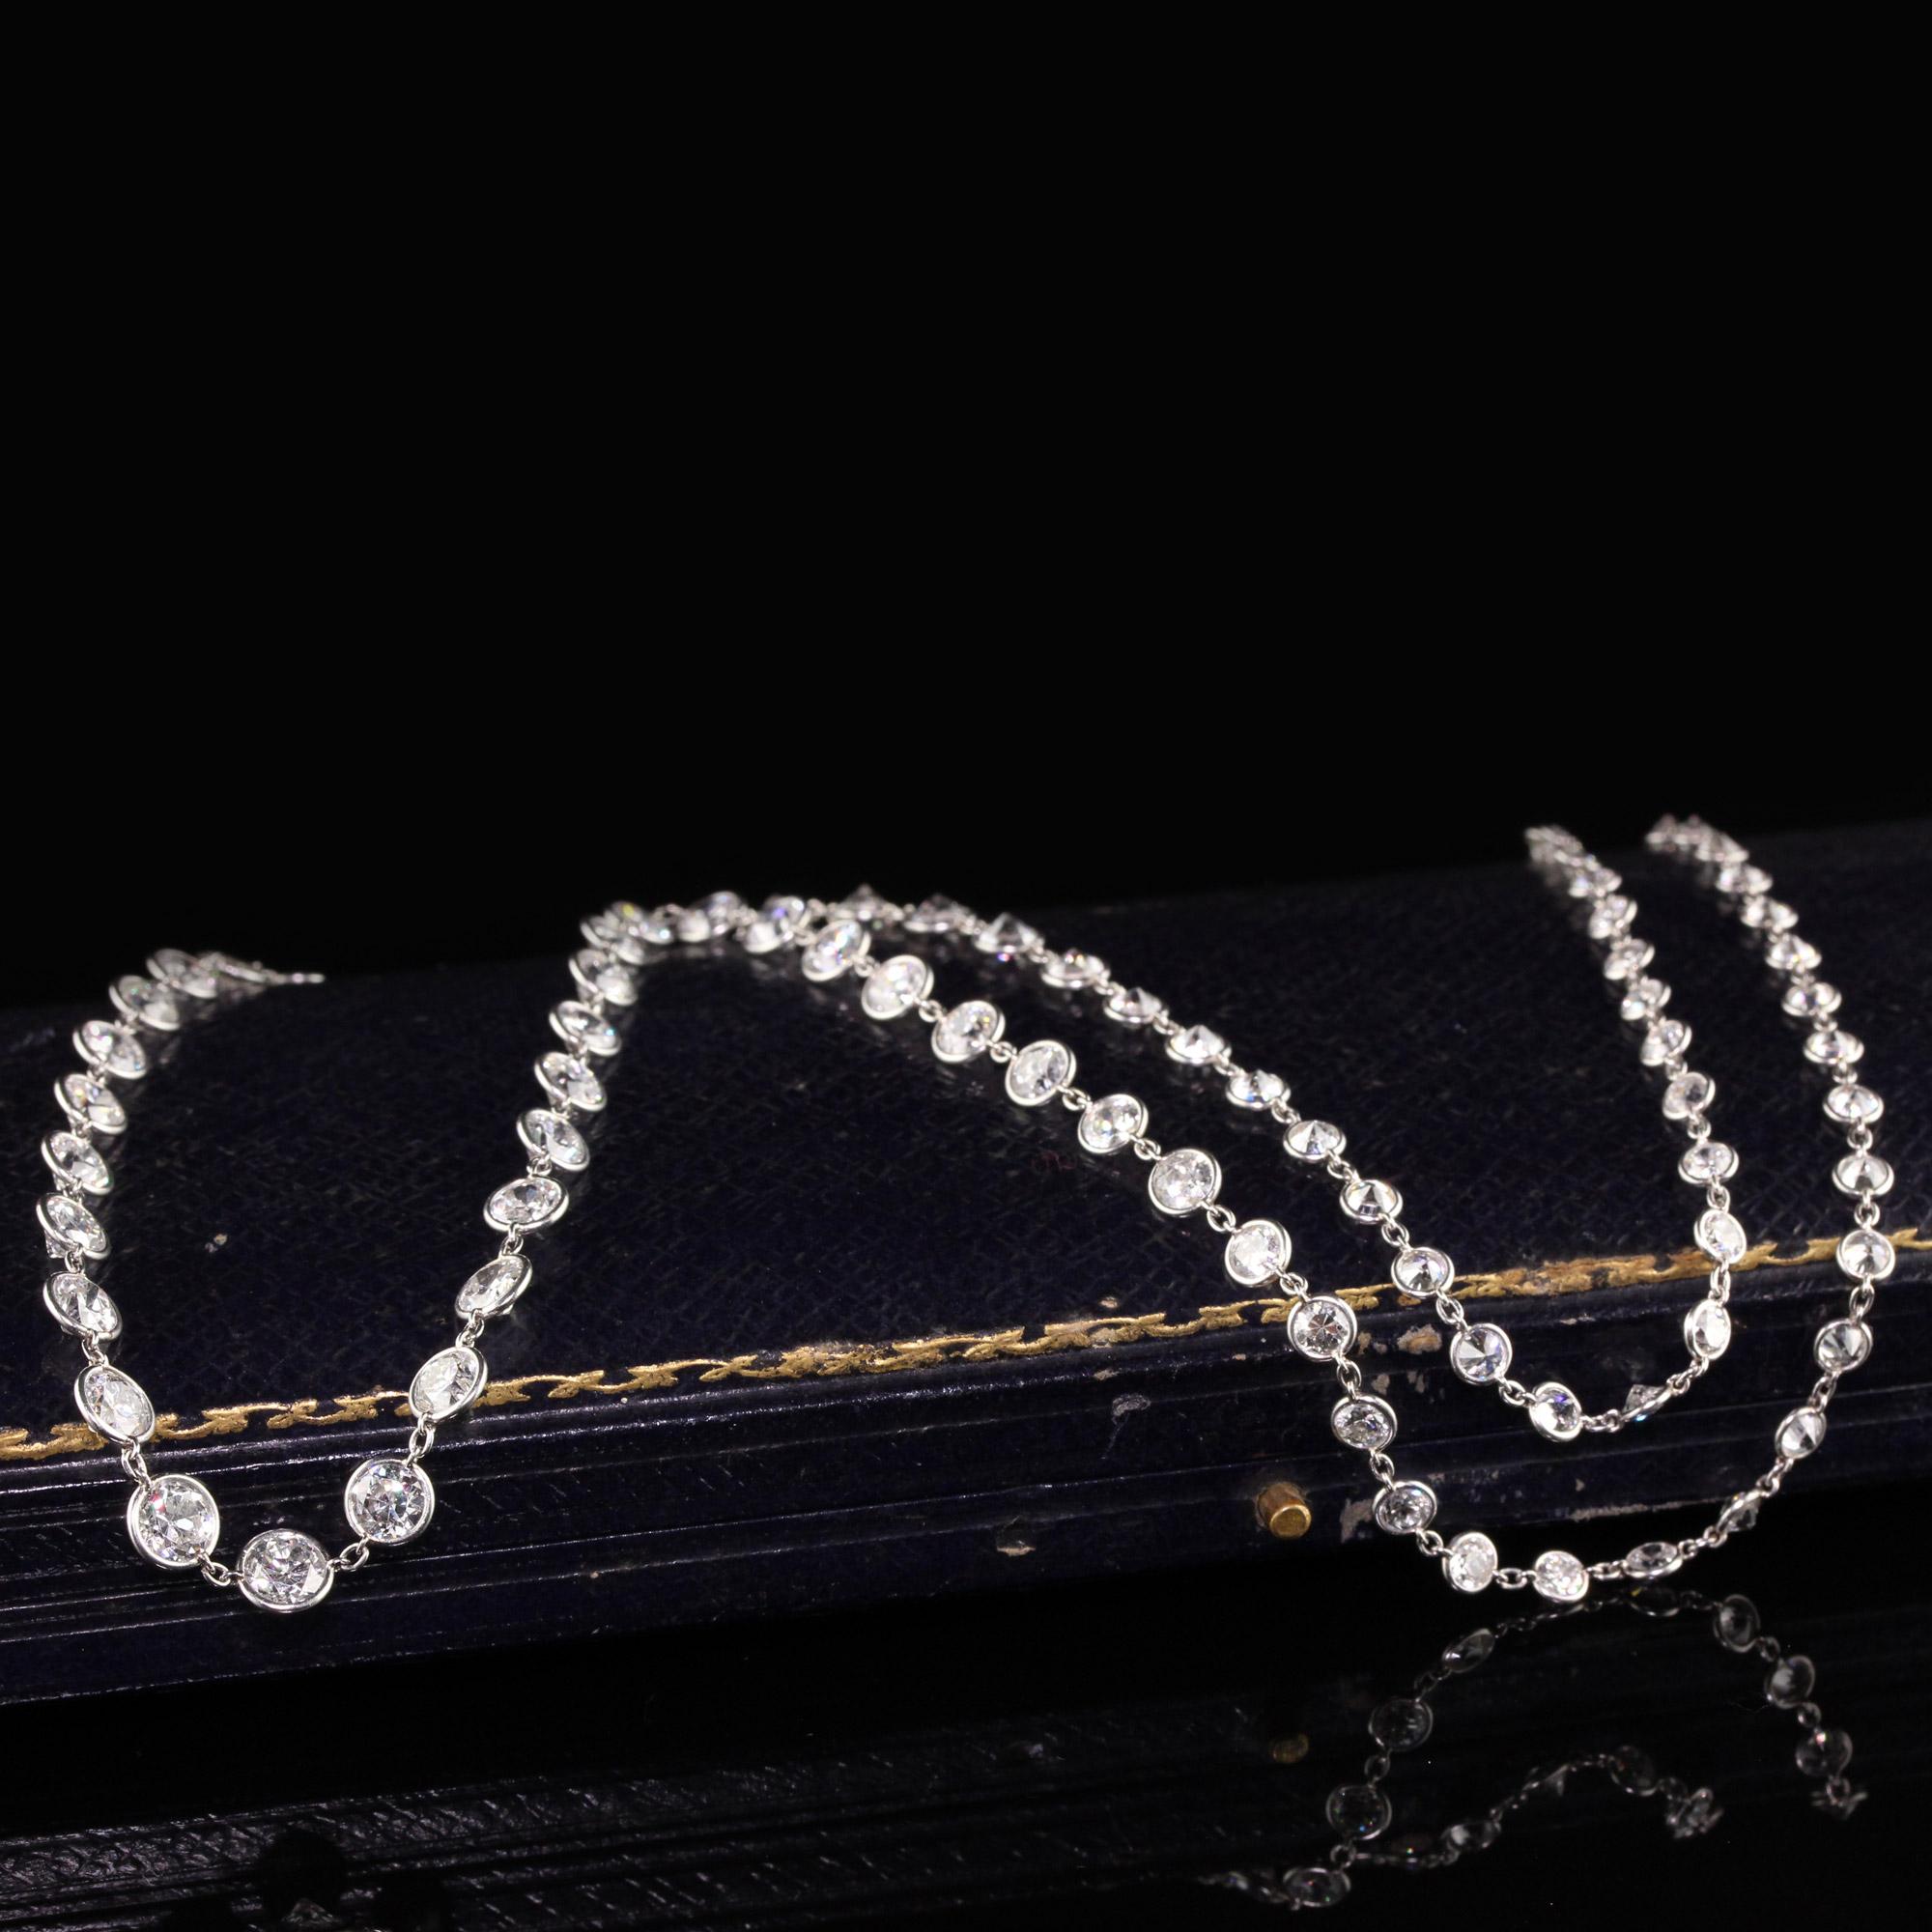 Gorgeous Antique Art Deco Platinum Graduated Old European Diamonds by the Yard Necklace. This beautiful and breathtaking necklace chain is 24 inches of graduated old european cut diamonds. The diamonds start at .15 cts and go up to .60 ct old